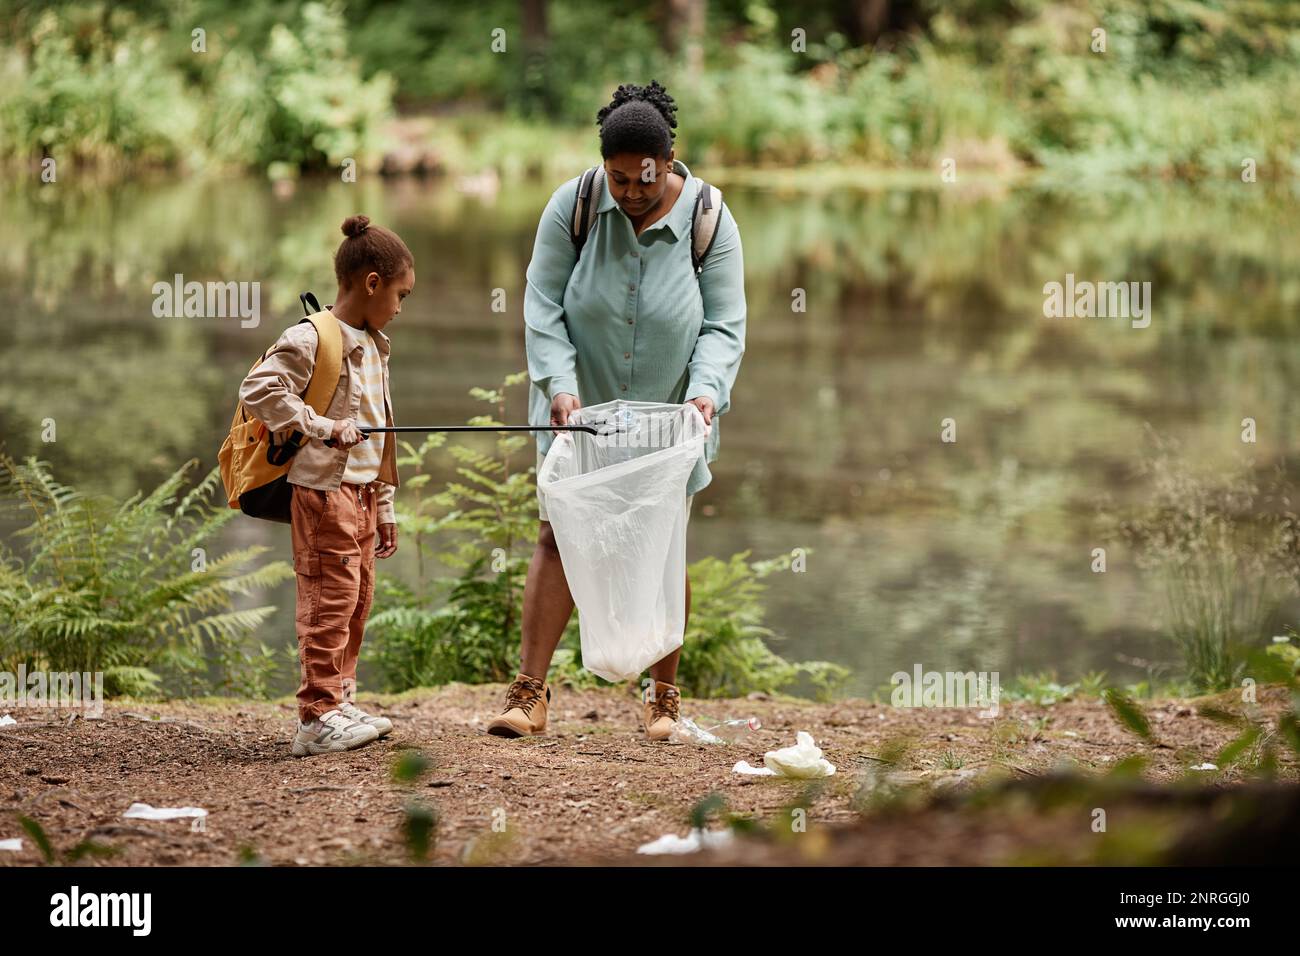 Full length portrait of eco-activist mother and daughter cleaning urban trash by river, copy space Stock Photo